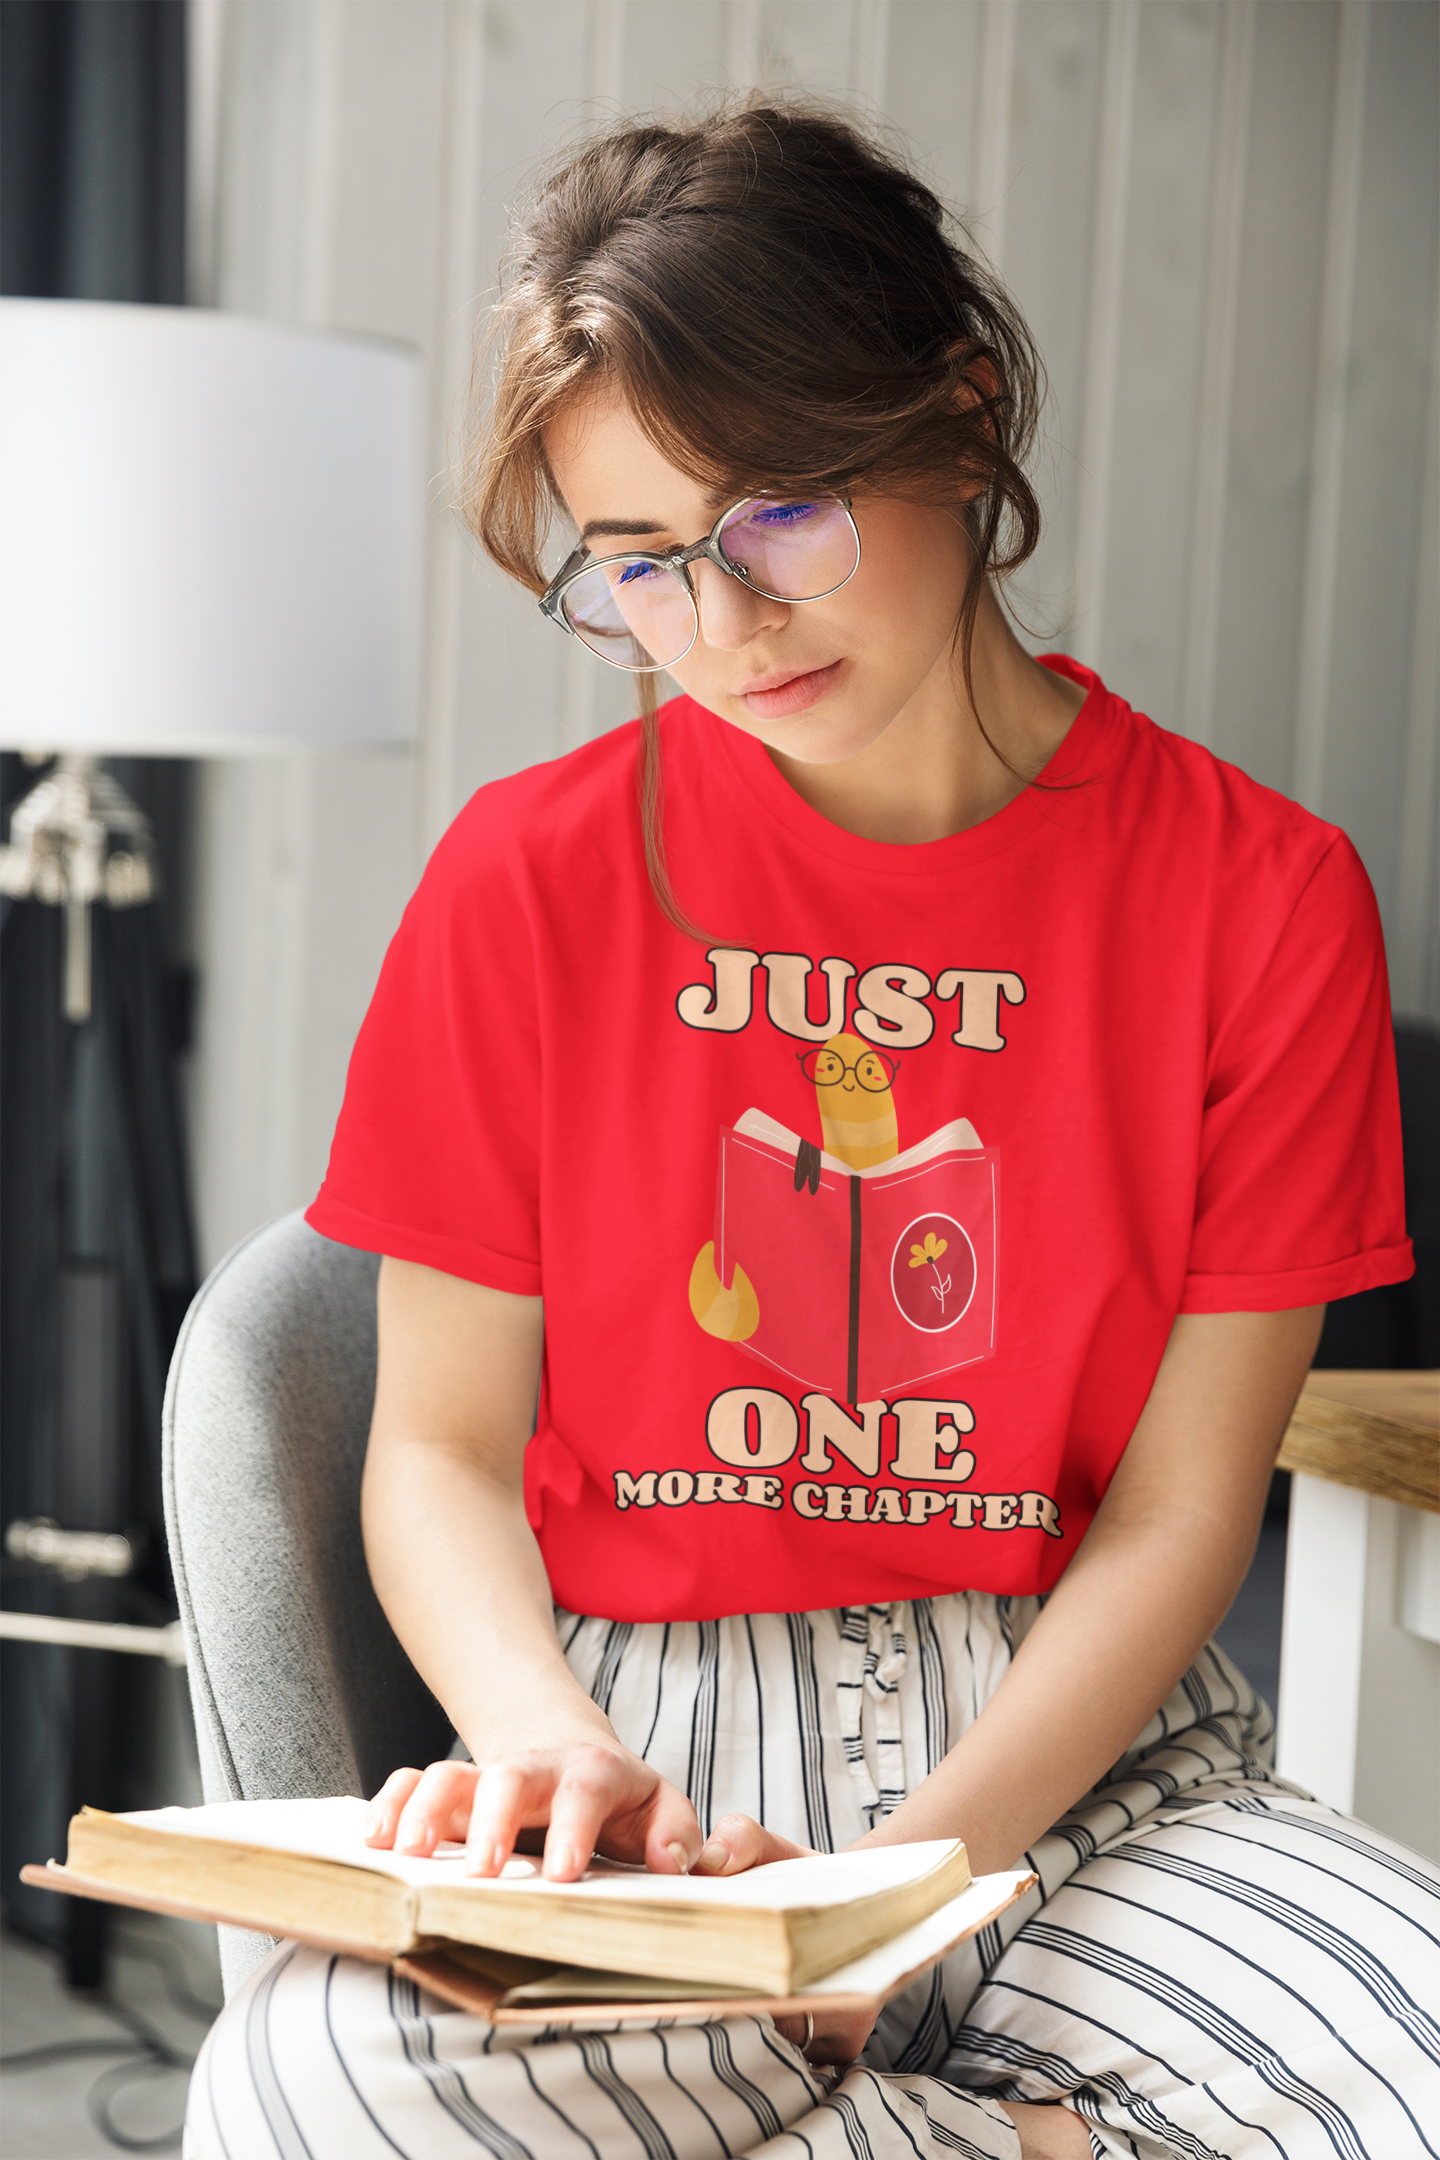 Just One More Chapter Women's T-shirt